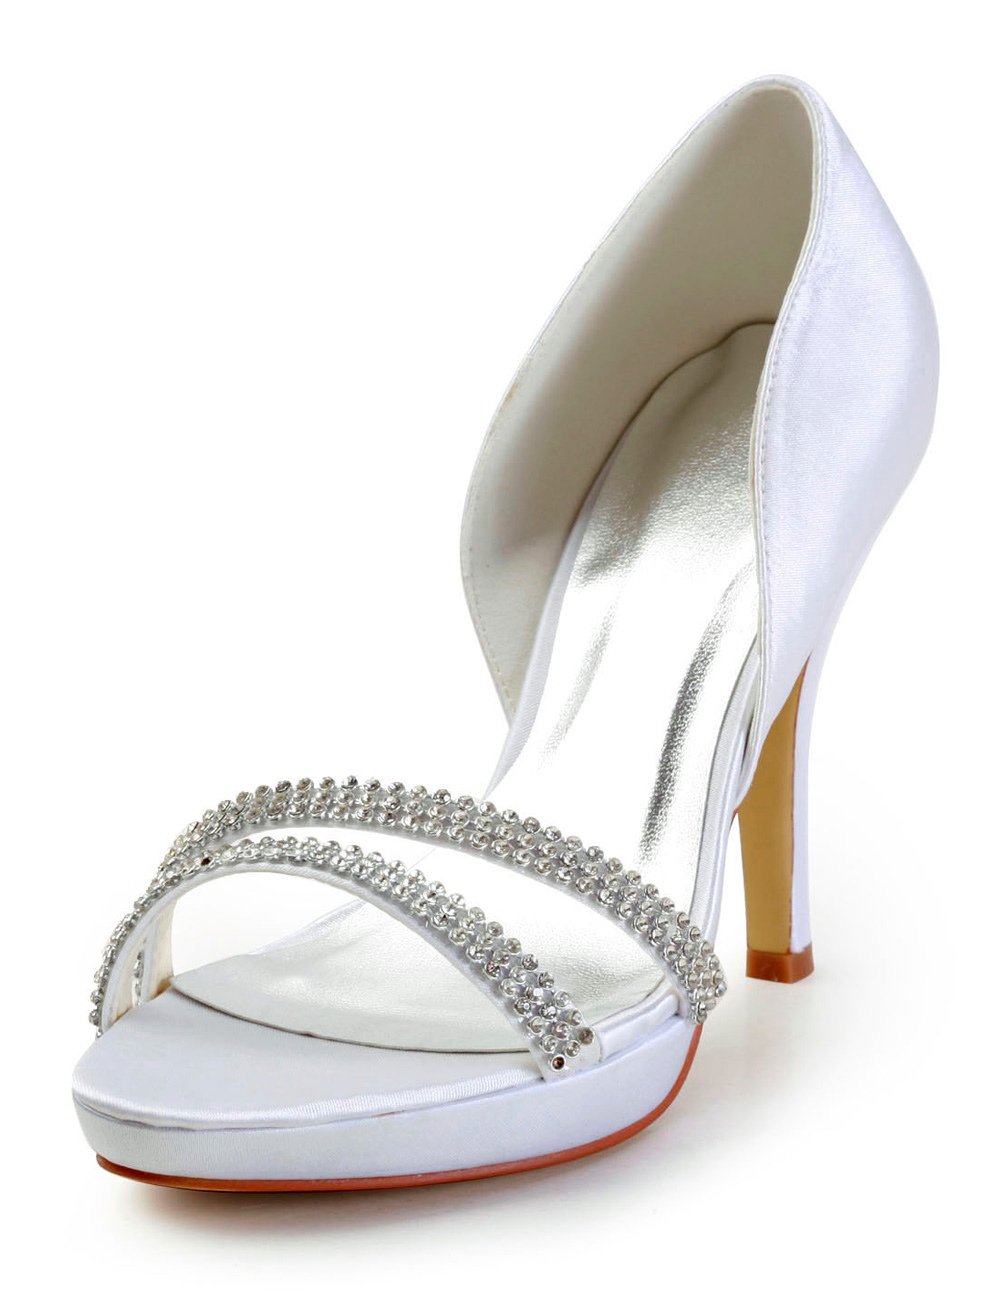 women's special occasion shoes